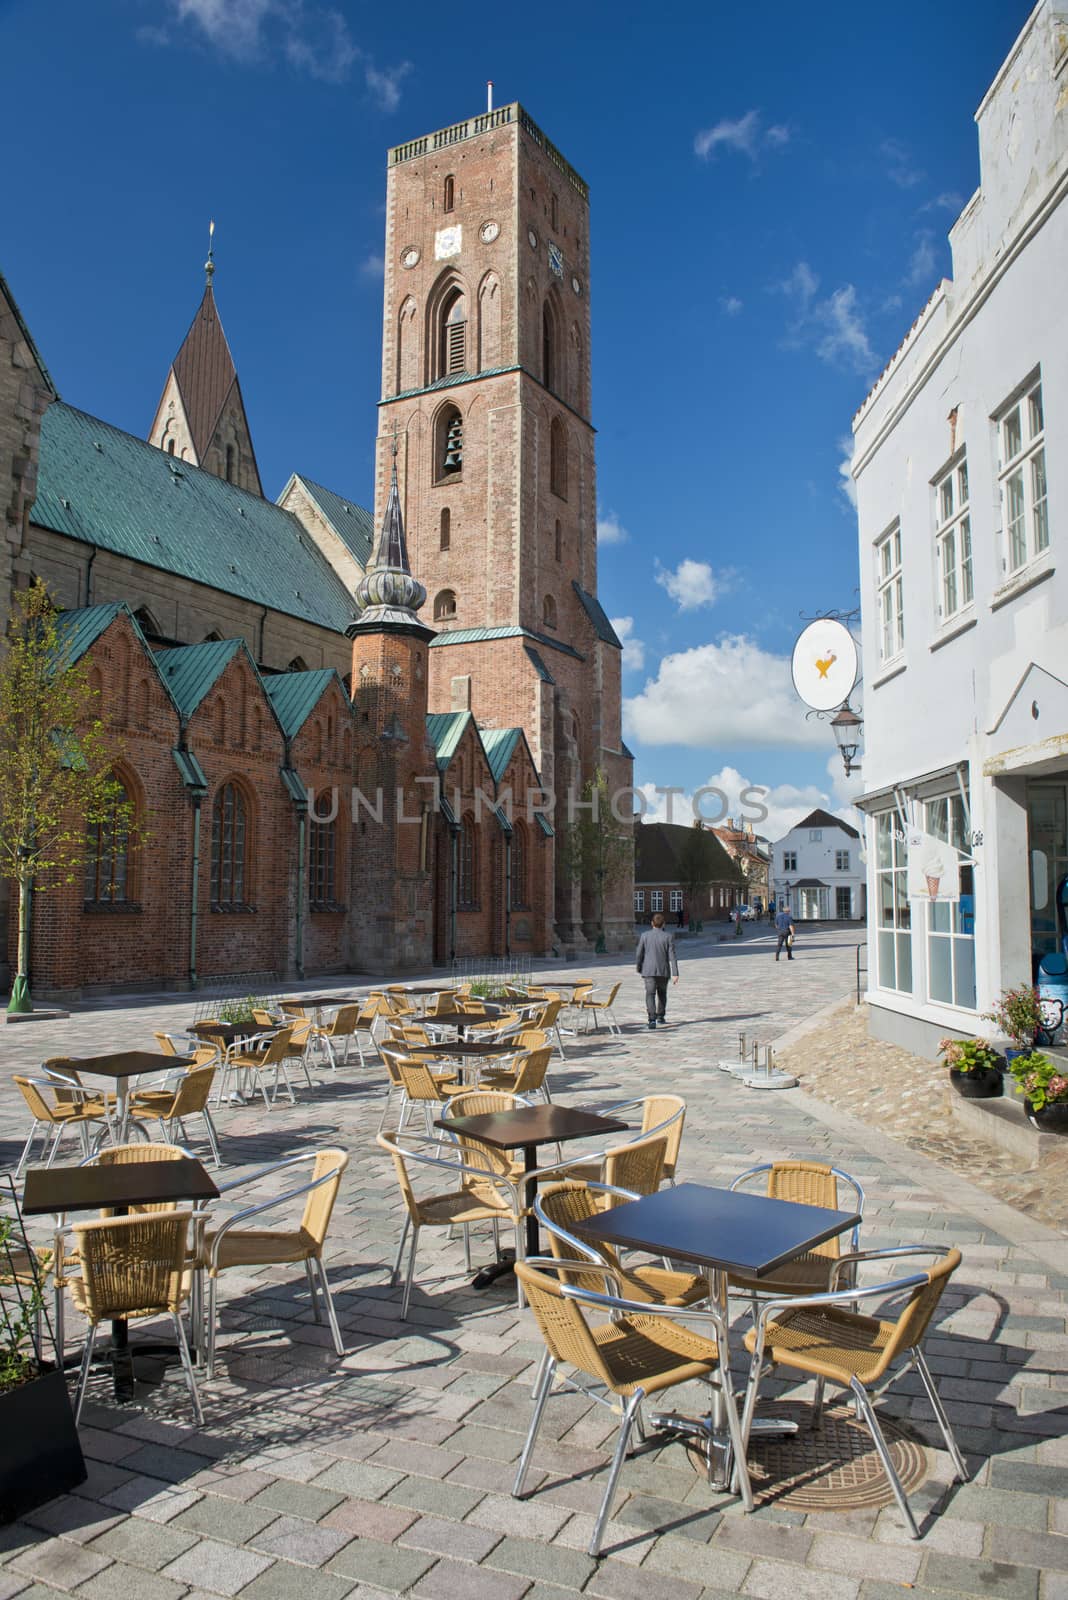 Square of Ribe, medieval town, ancient capital of Denmark